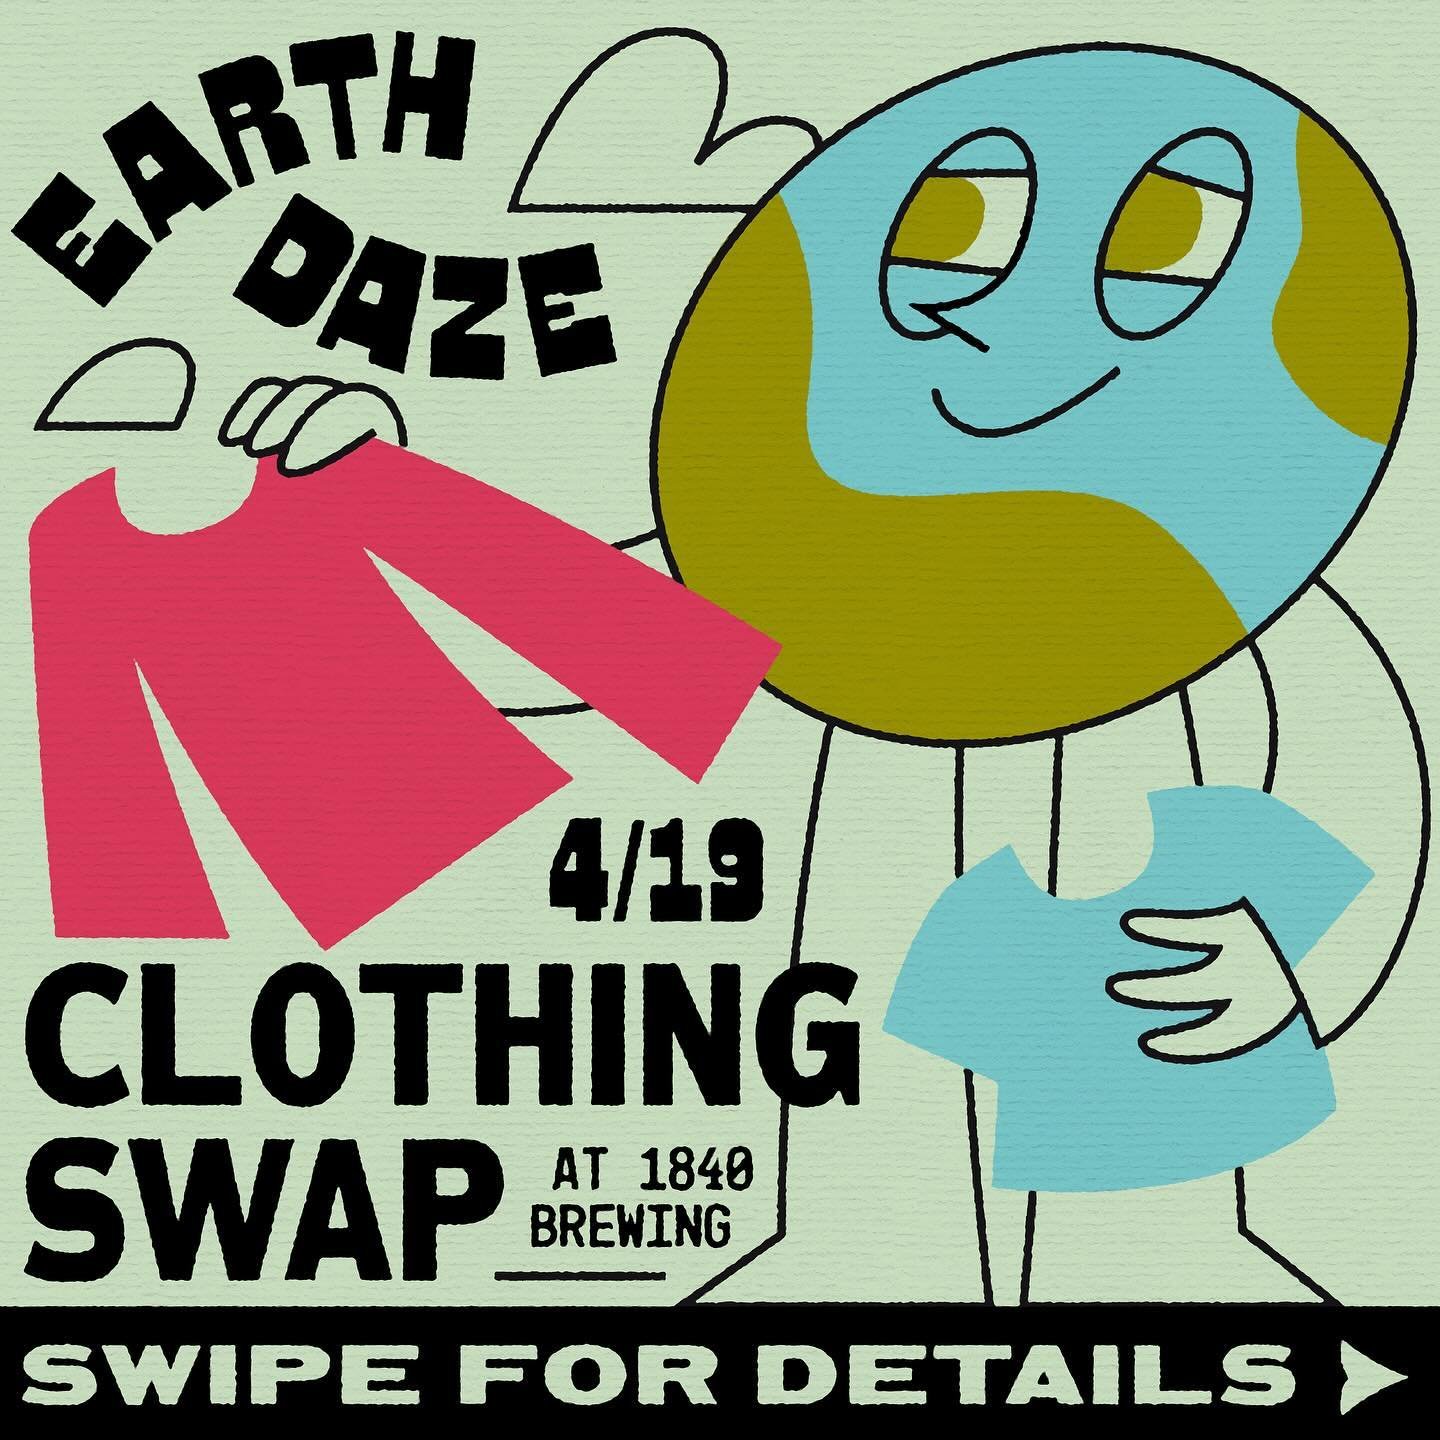 Our Earth Daze clothing swap is rapidly approaching! Trade out the pieces you're tired of and bring back some fresh new fits, all for free! 

We&rsquo;ll be hosting this exchange in our taproom on April 19 from 4:30-6:30. Bring your clothing in to 18